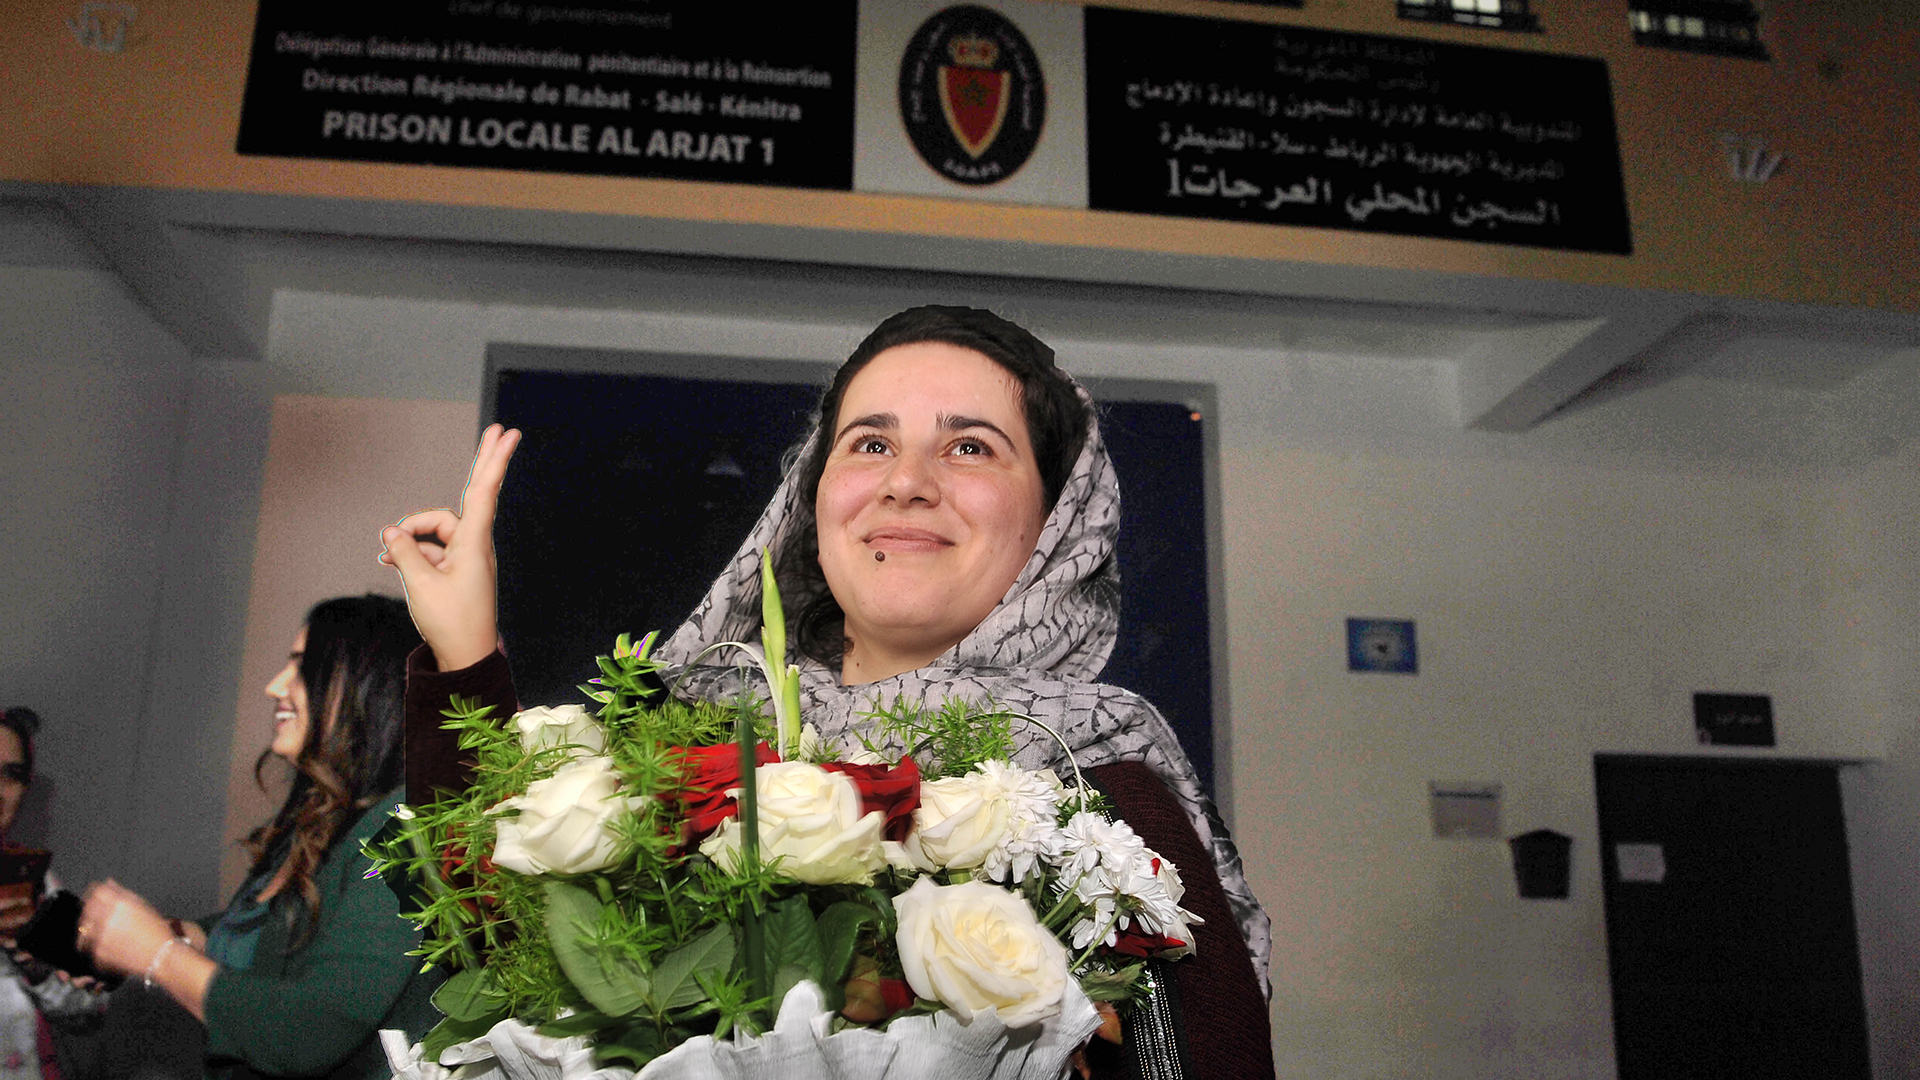 Hajar on the day she was released with a royal pardon -  Oct 17, 2019